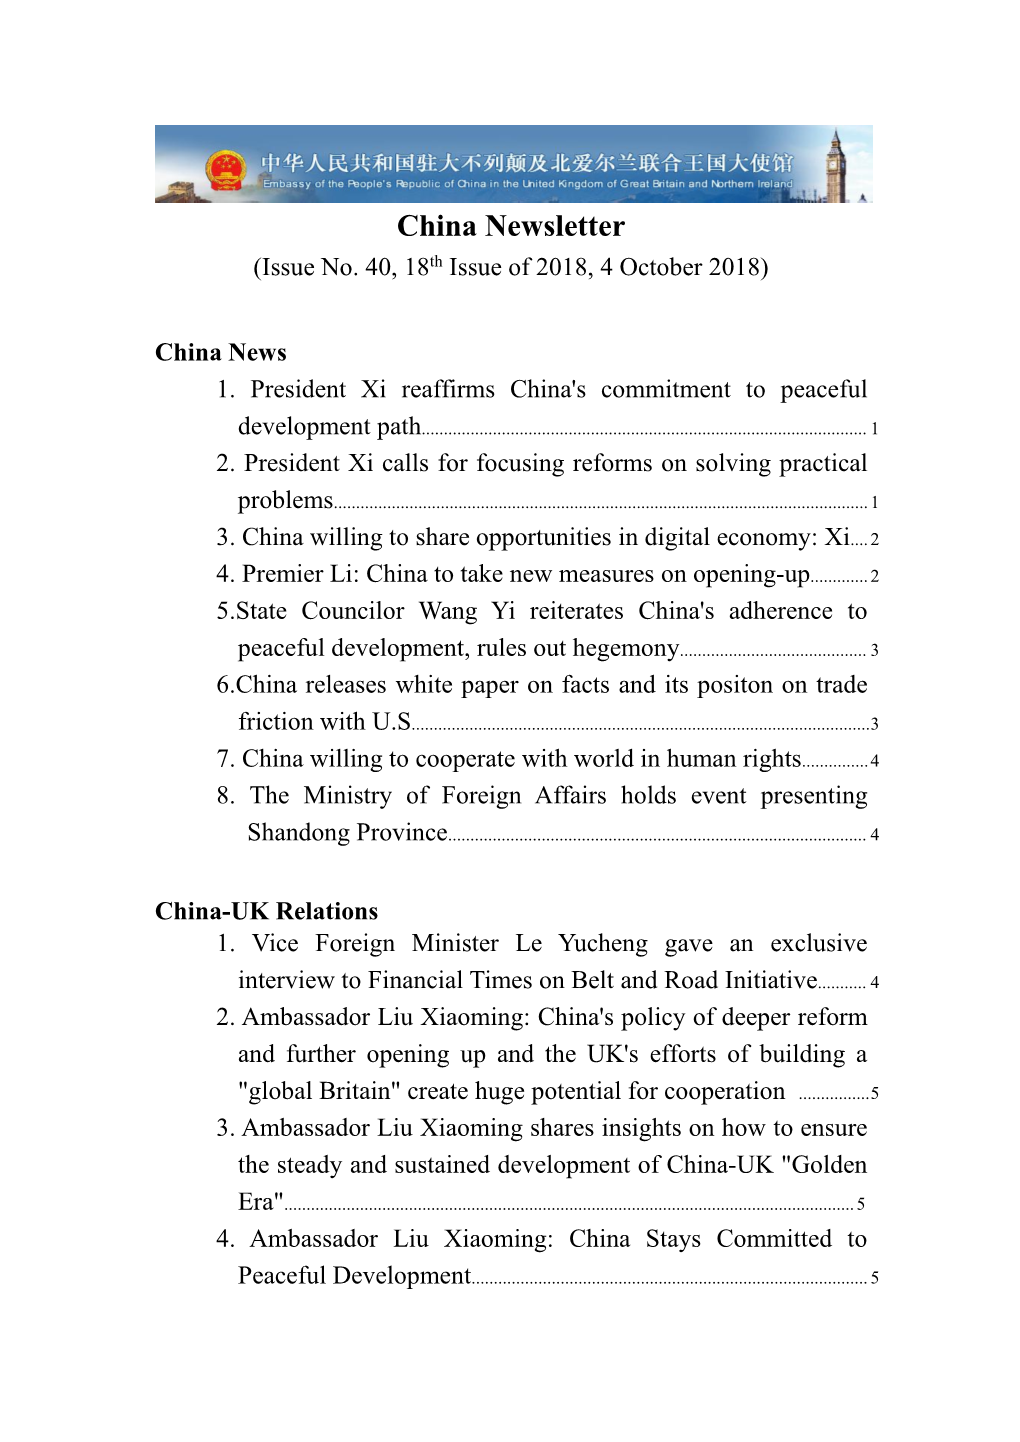 China Newsletter (Issue No.40)